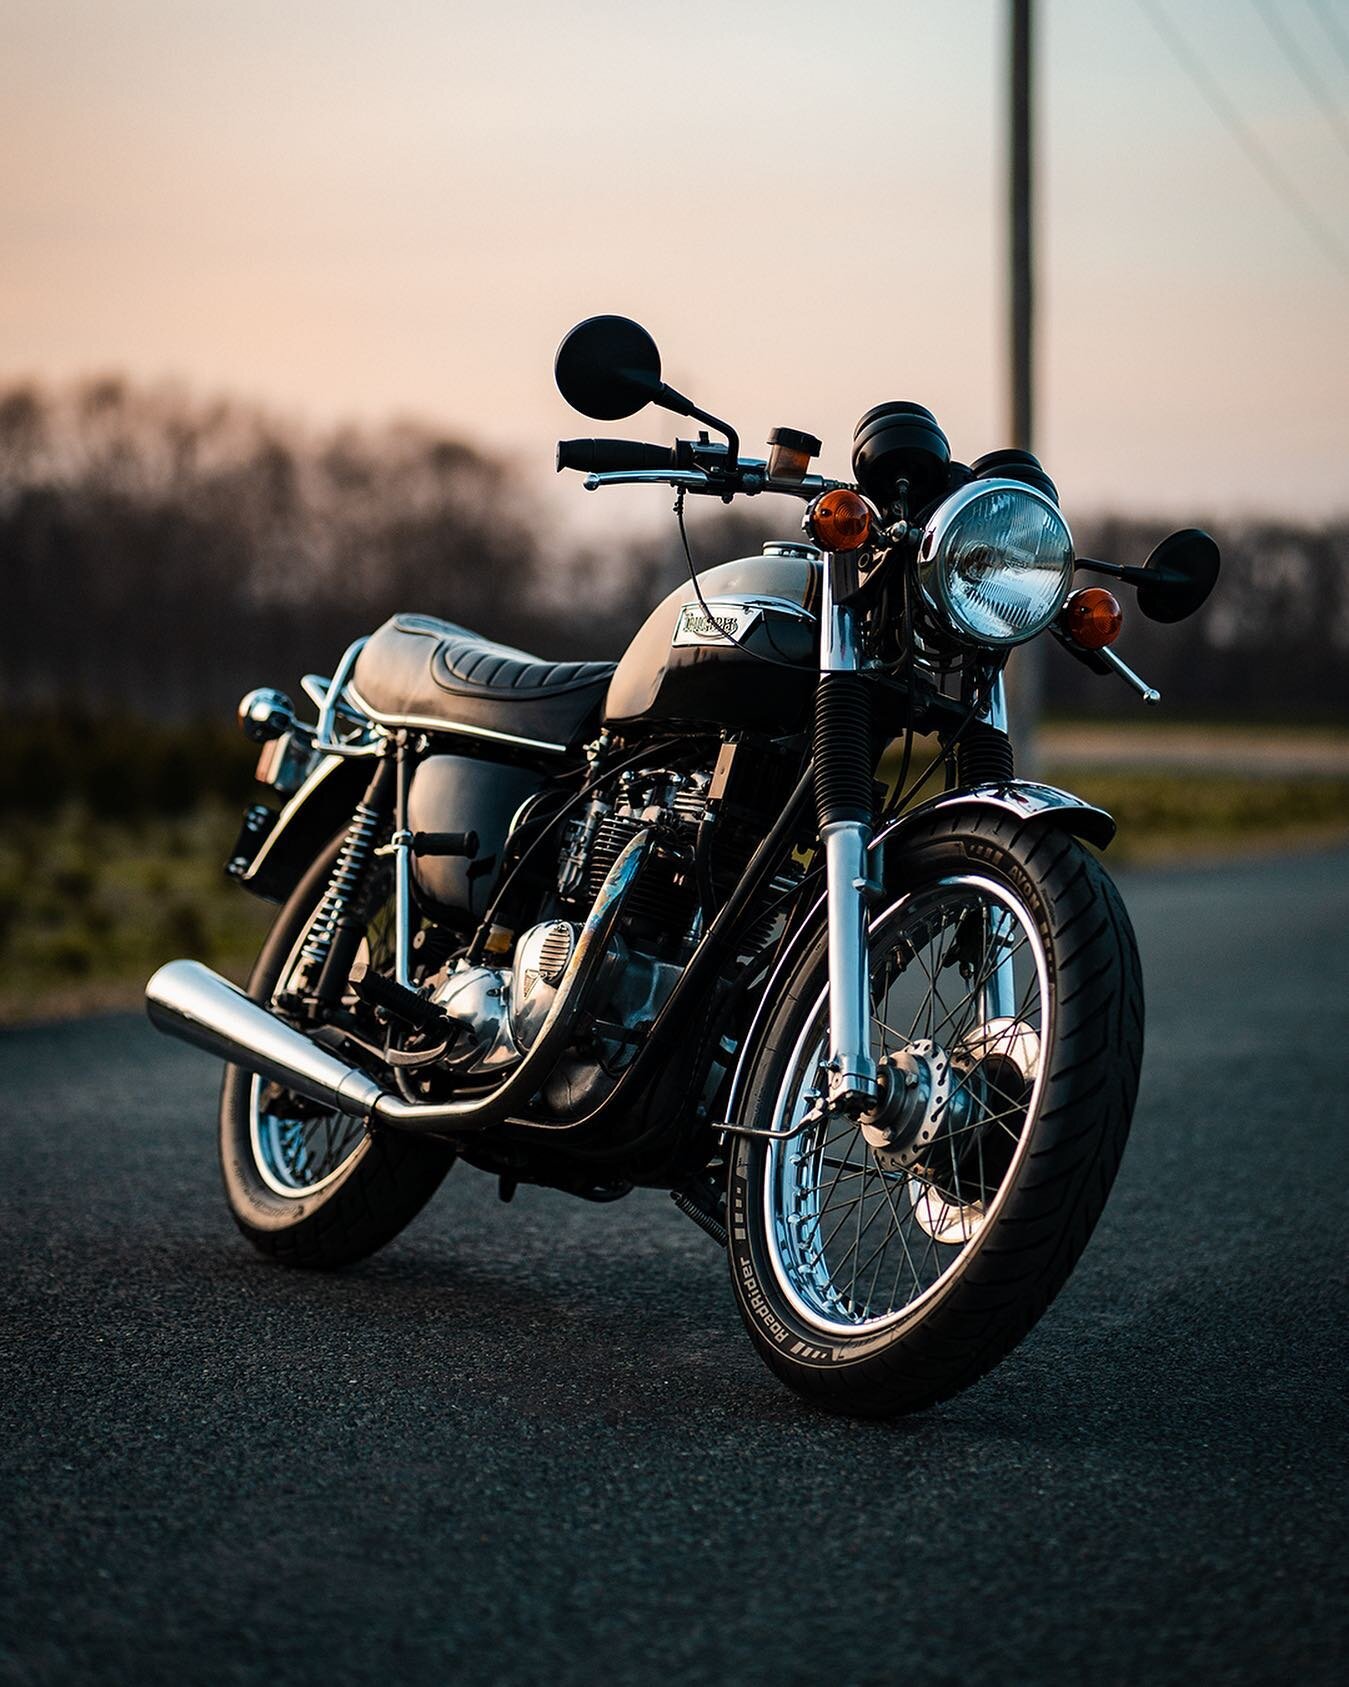 A beautiful evening ride on the Triumph